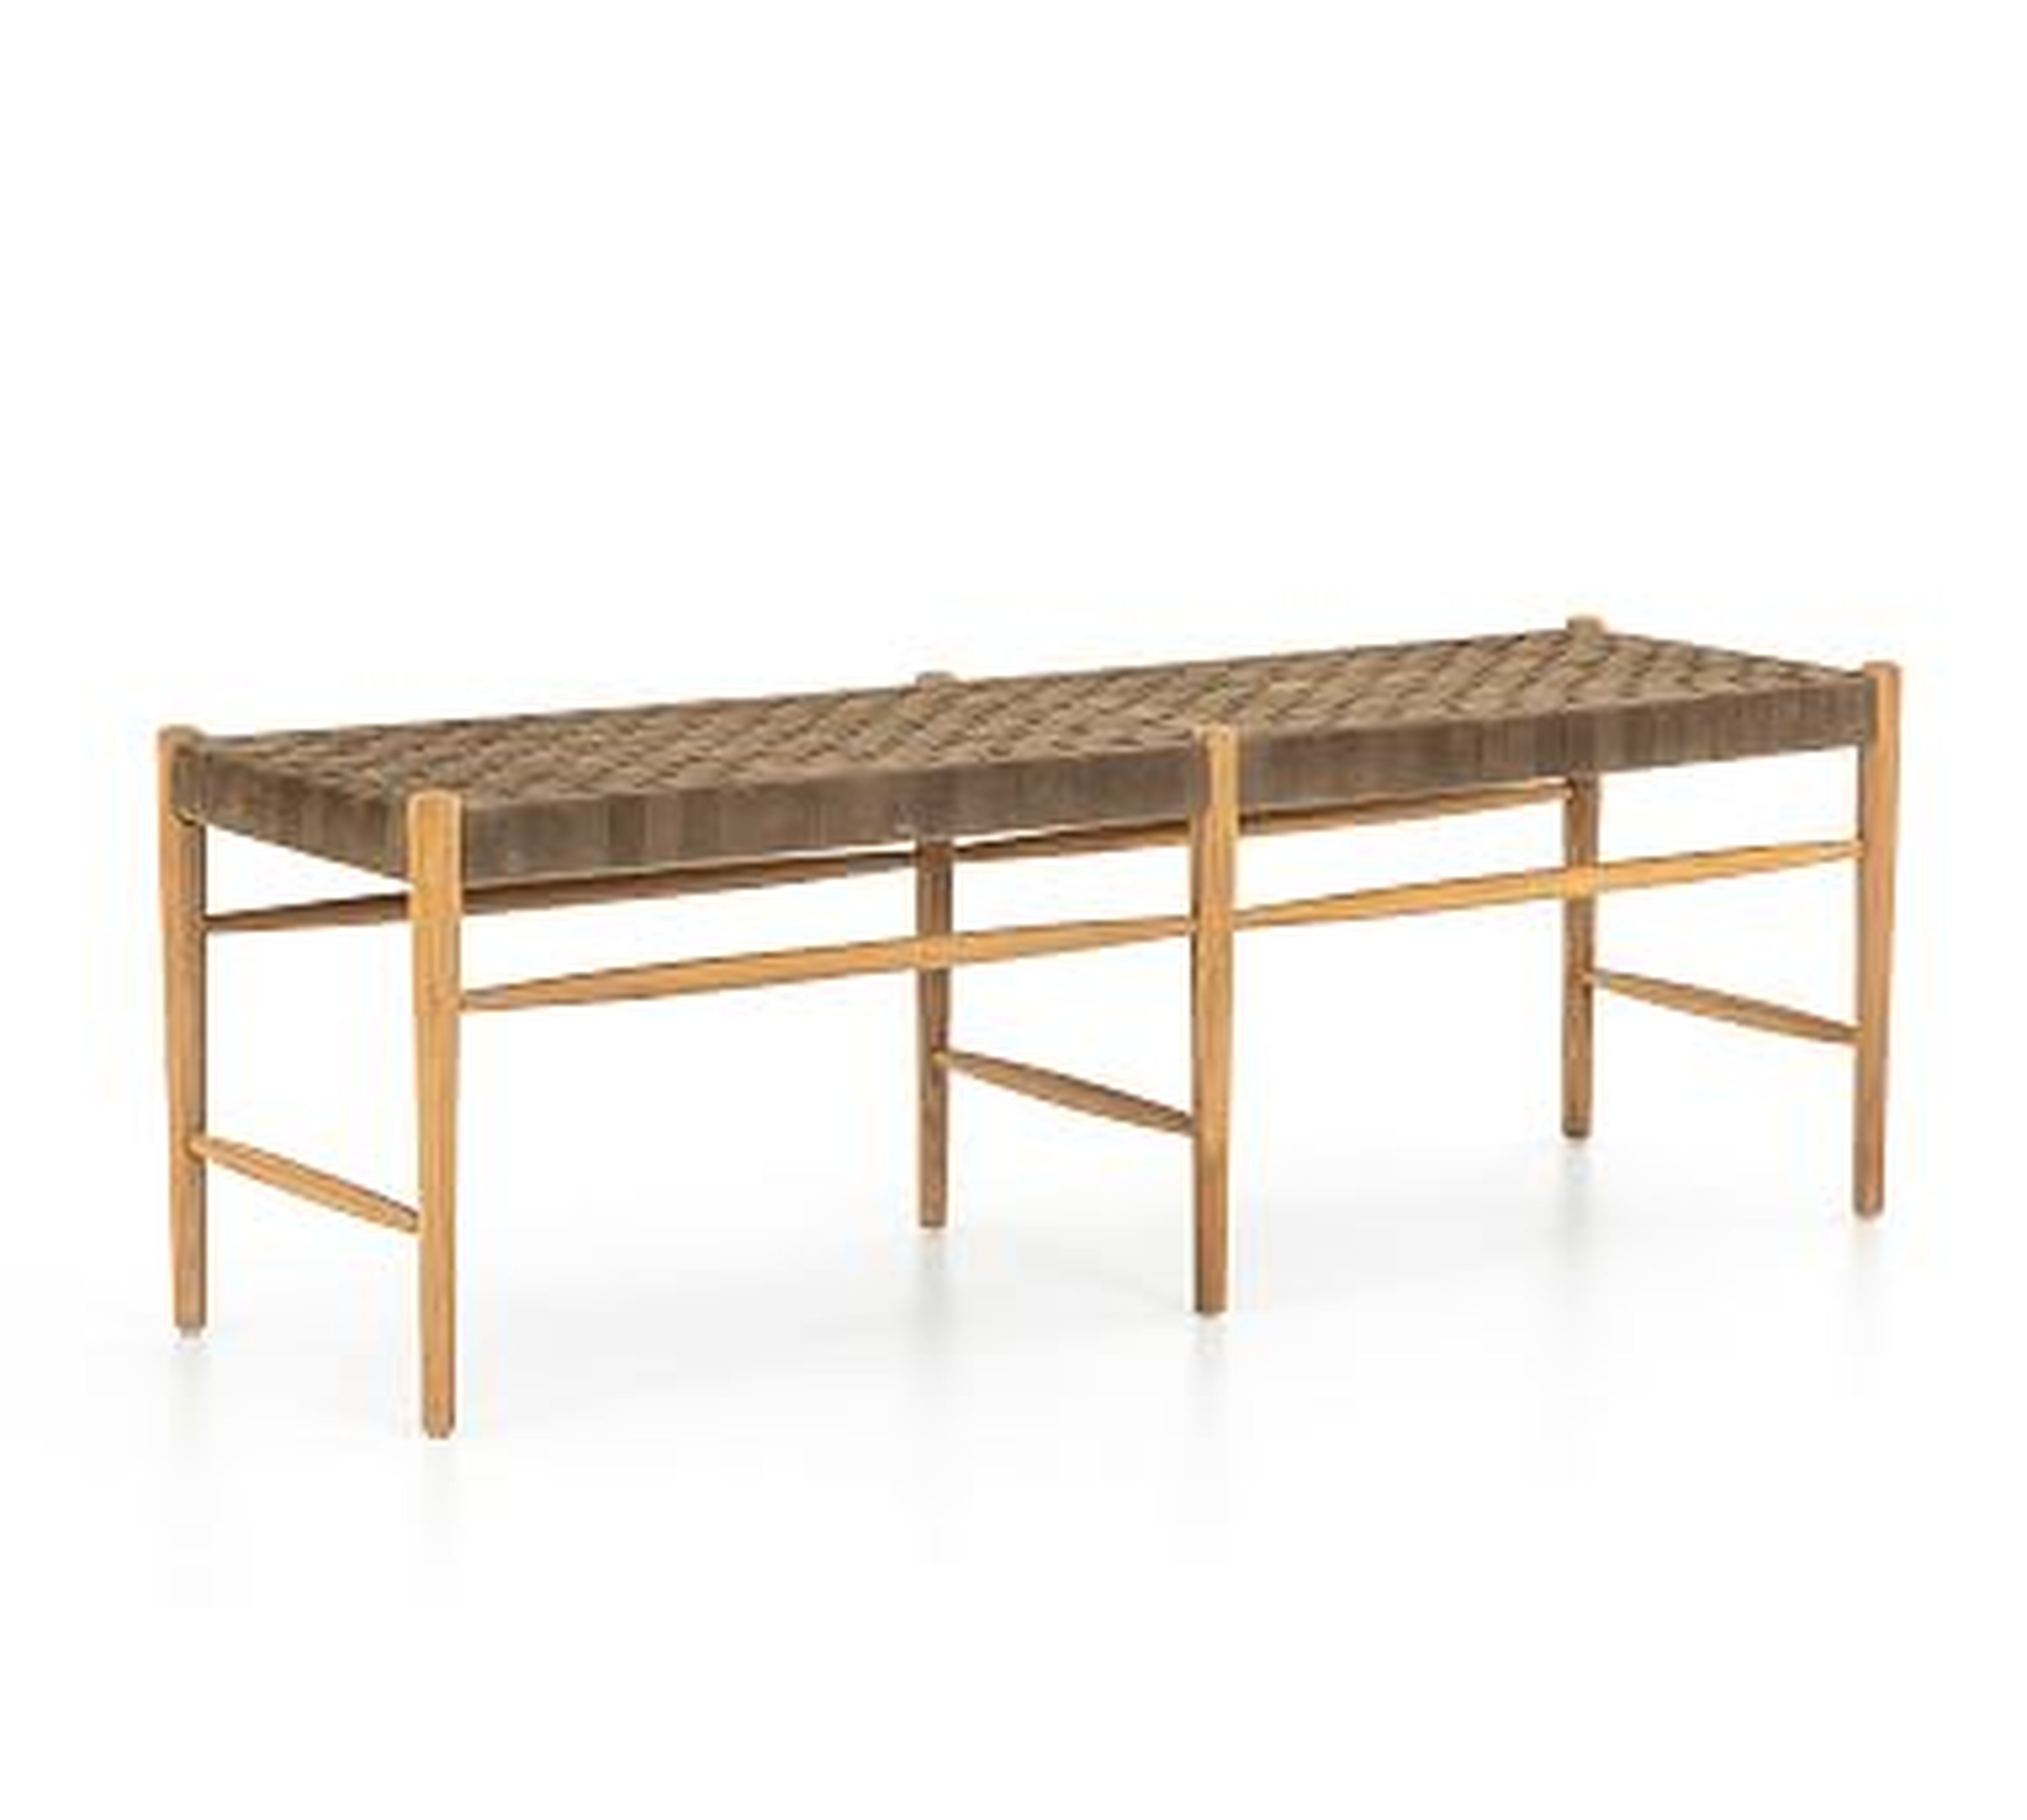 Thomas Woven Leather Bench, Coffee/Natural Oak - Pottery Barn